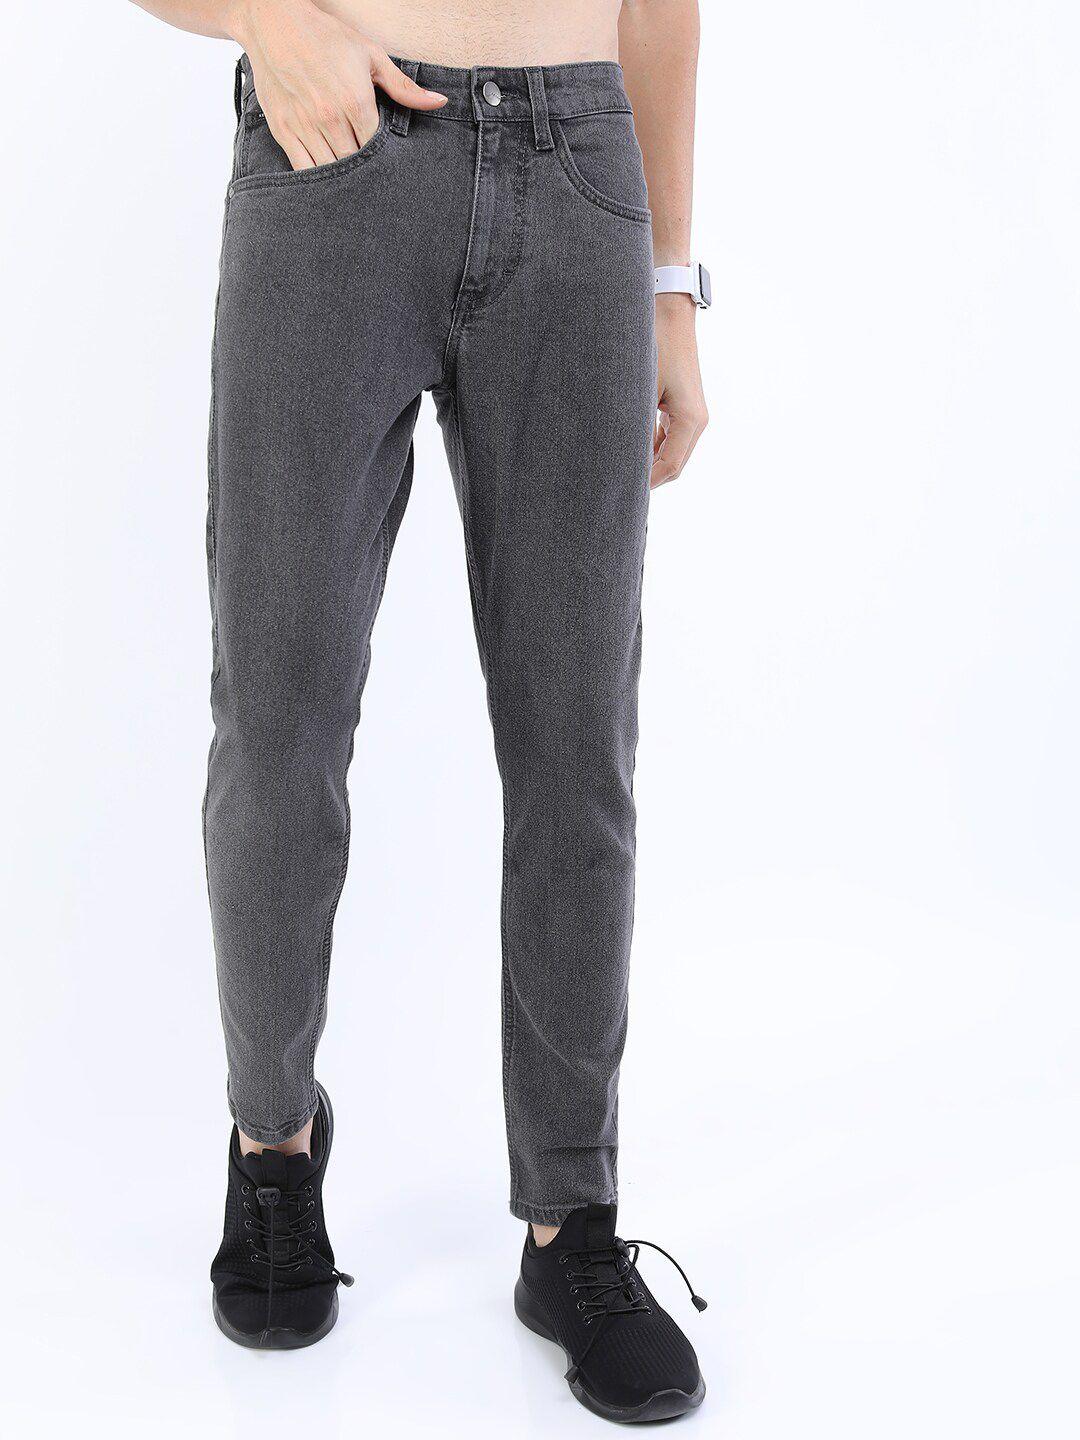 ketch-men-grey-tapered-fit-clean-look-stretchable-jeans